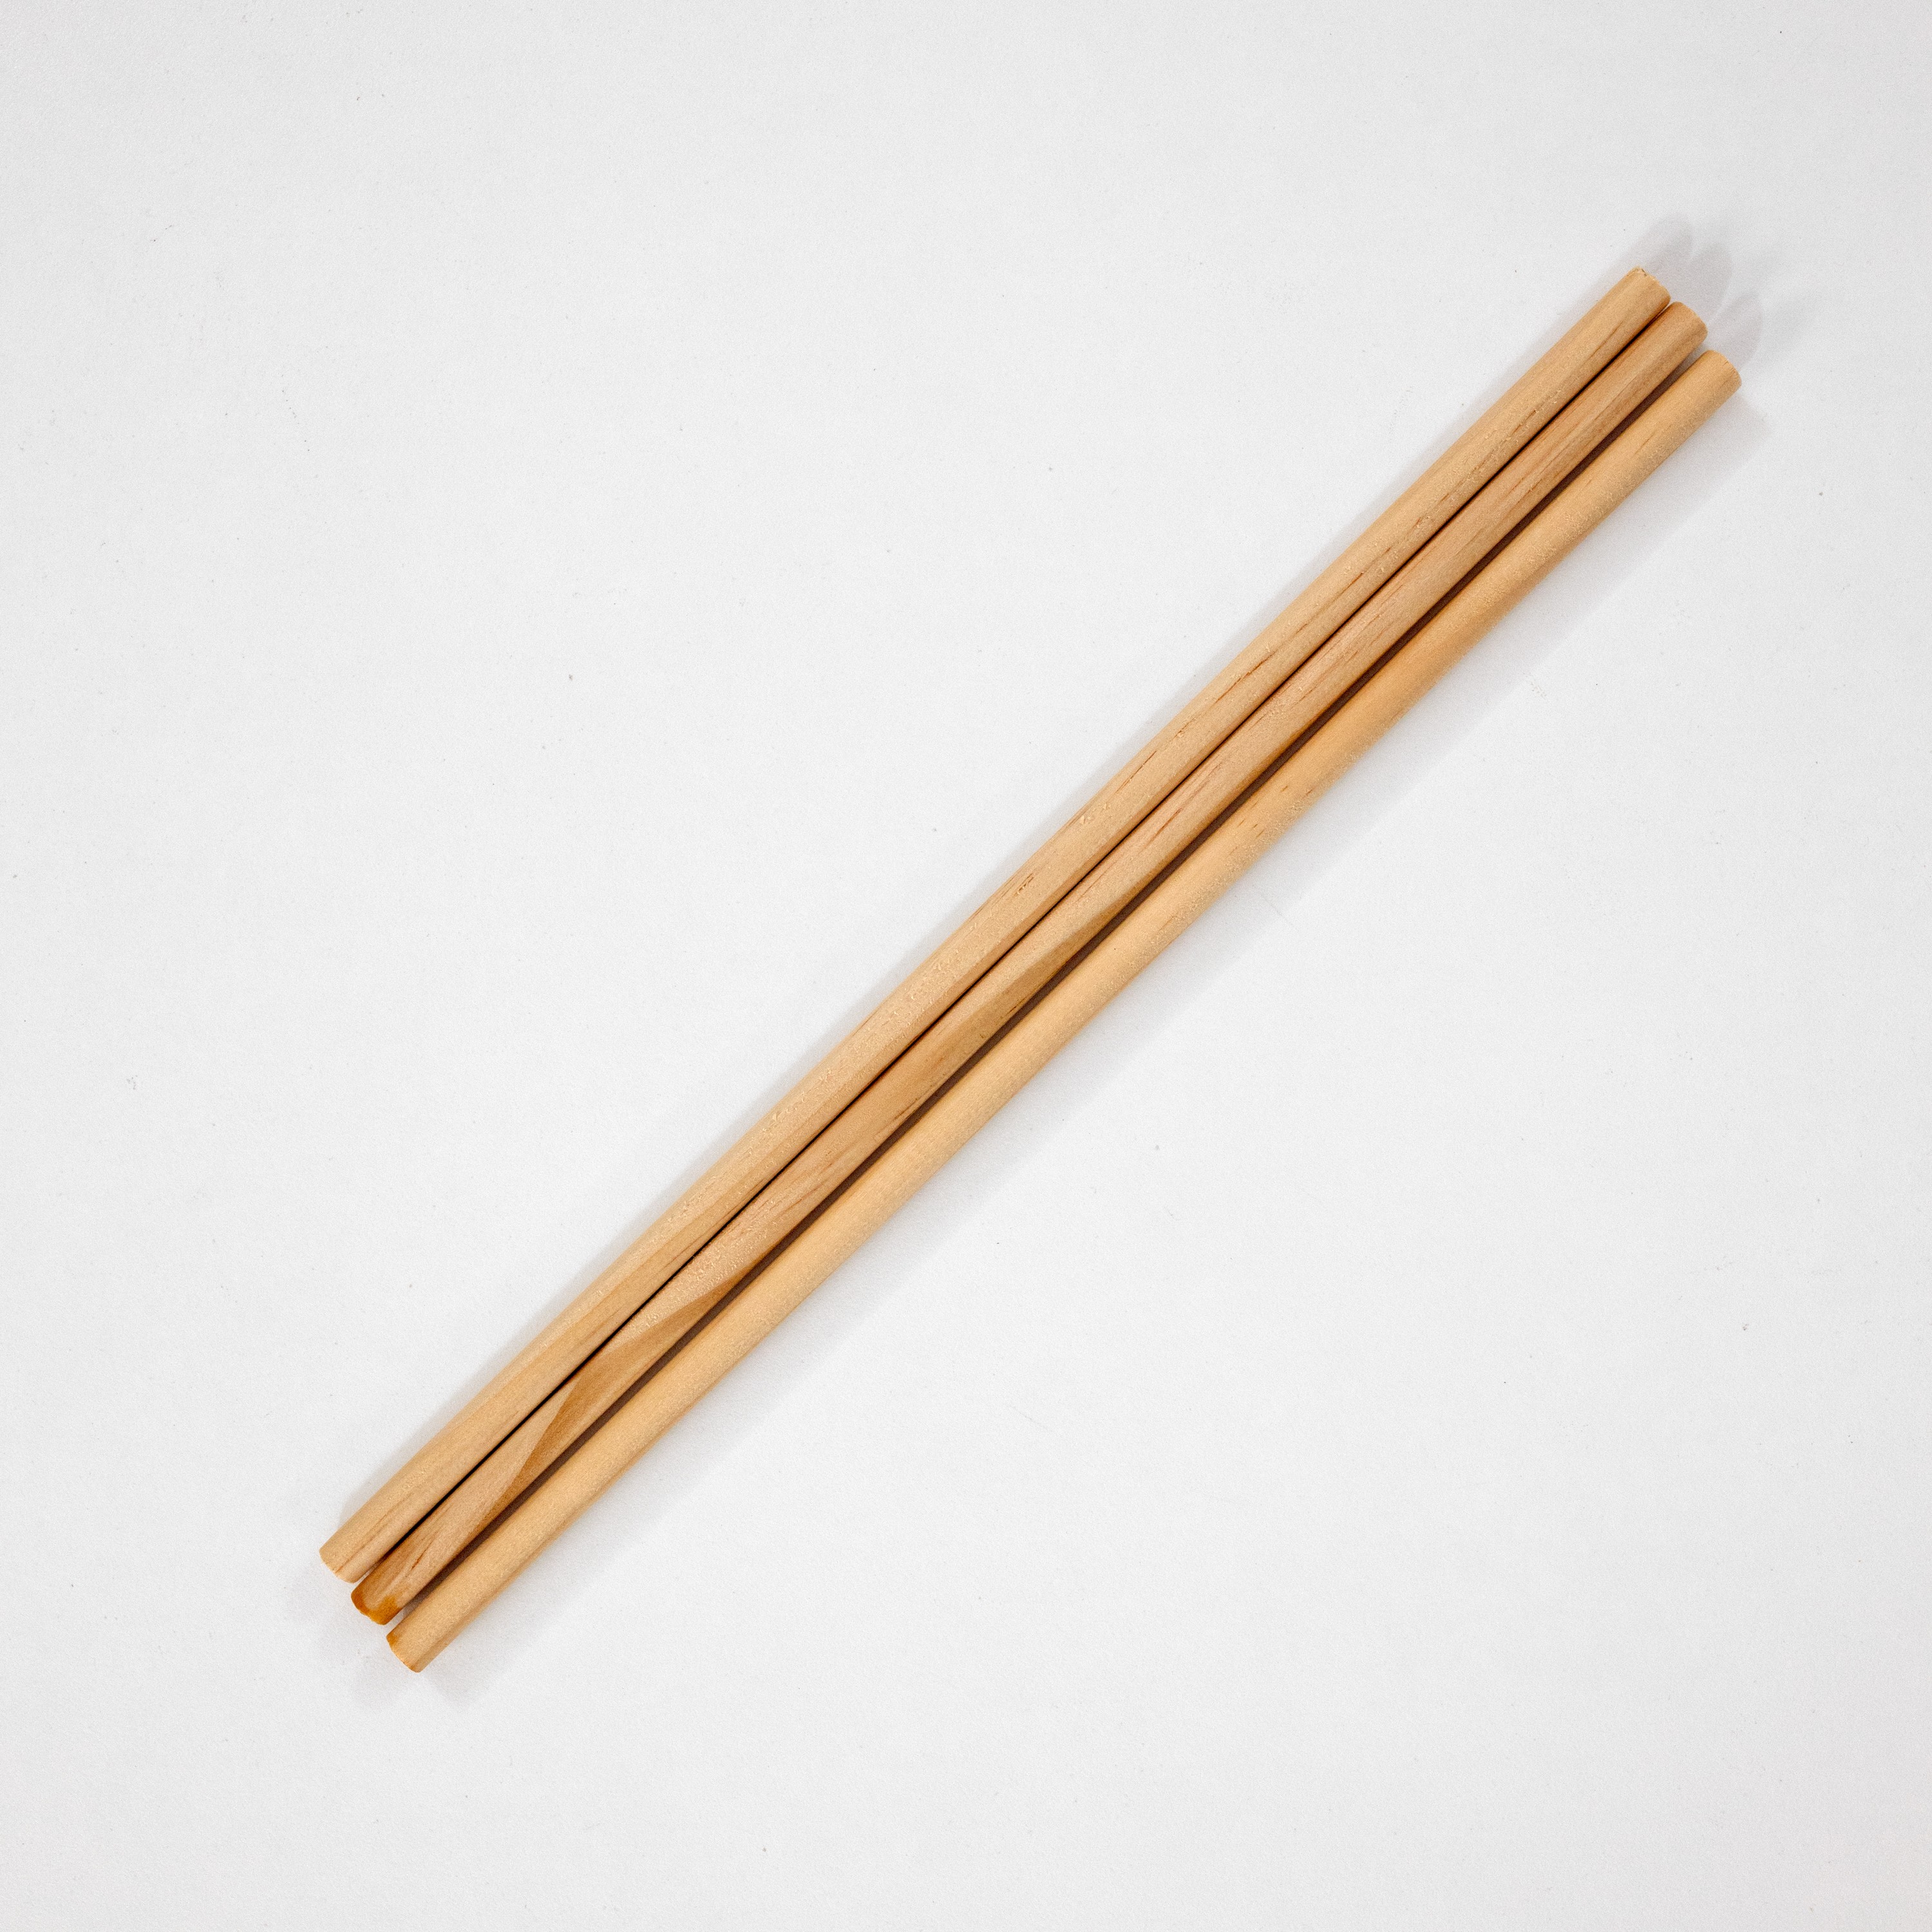 This is an image of a Ashford Wooden Weaving Needle, available for purchase from the Clever Poppy Shop.This is an image of a 3 pack of dowels, available for purchase from the Clever Poppy Shop.